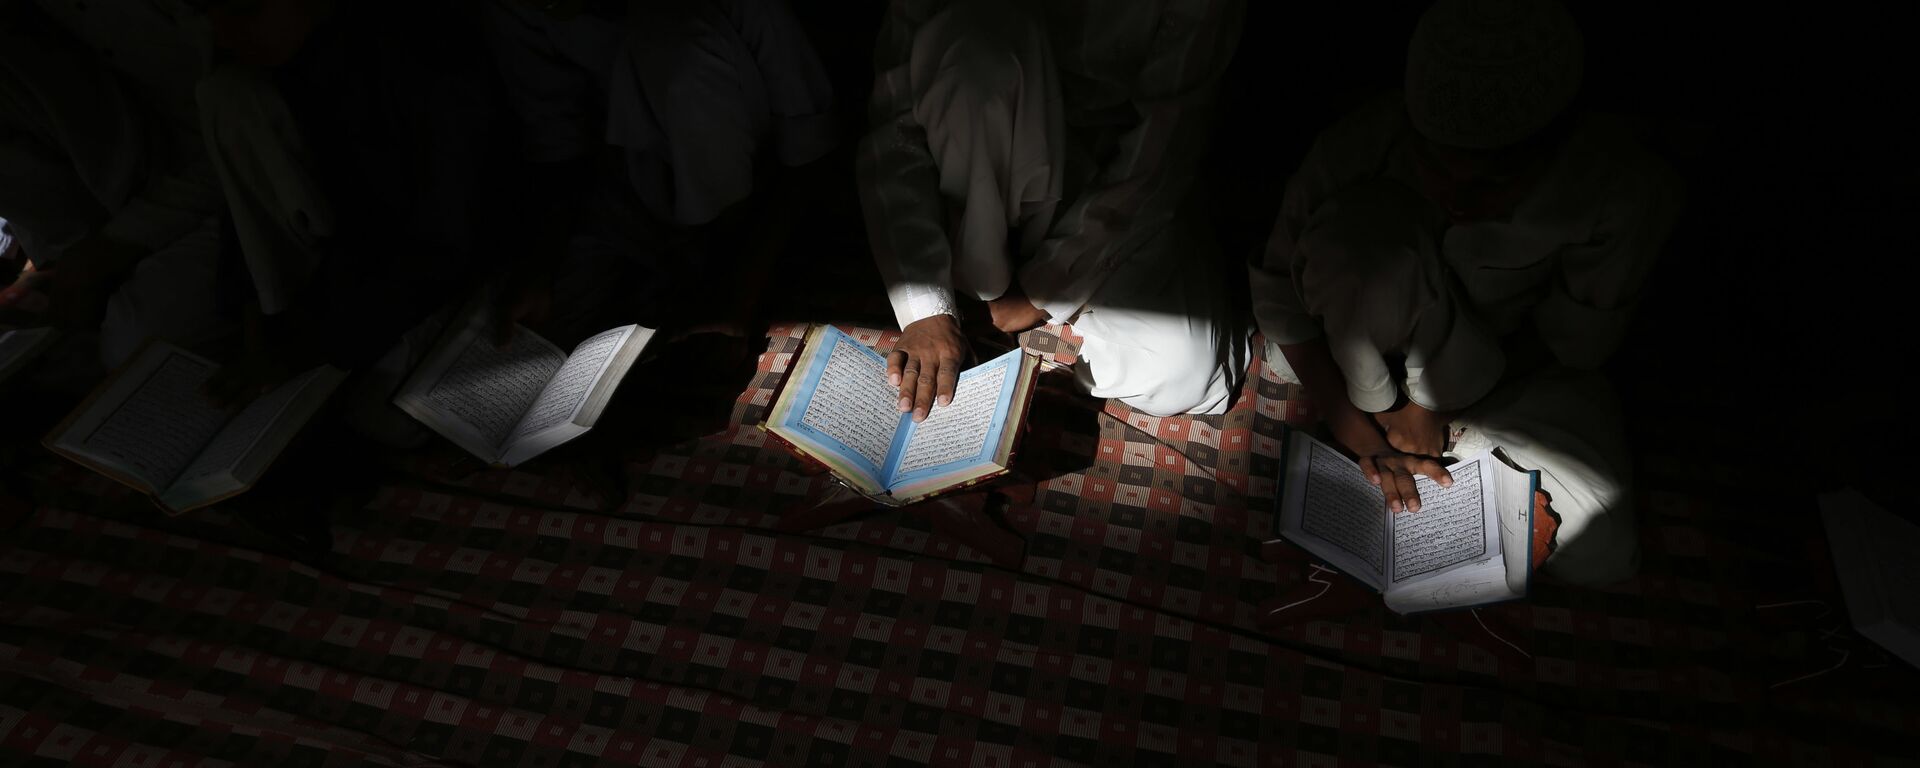 Indian Muslims  read the holy Quran at a mosque in Allahabad, Uttar Pradesh state, India, Tuesday, March 28, 2017 - Sputnik International, 1920, 07.04.2021